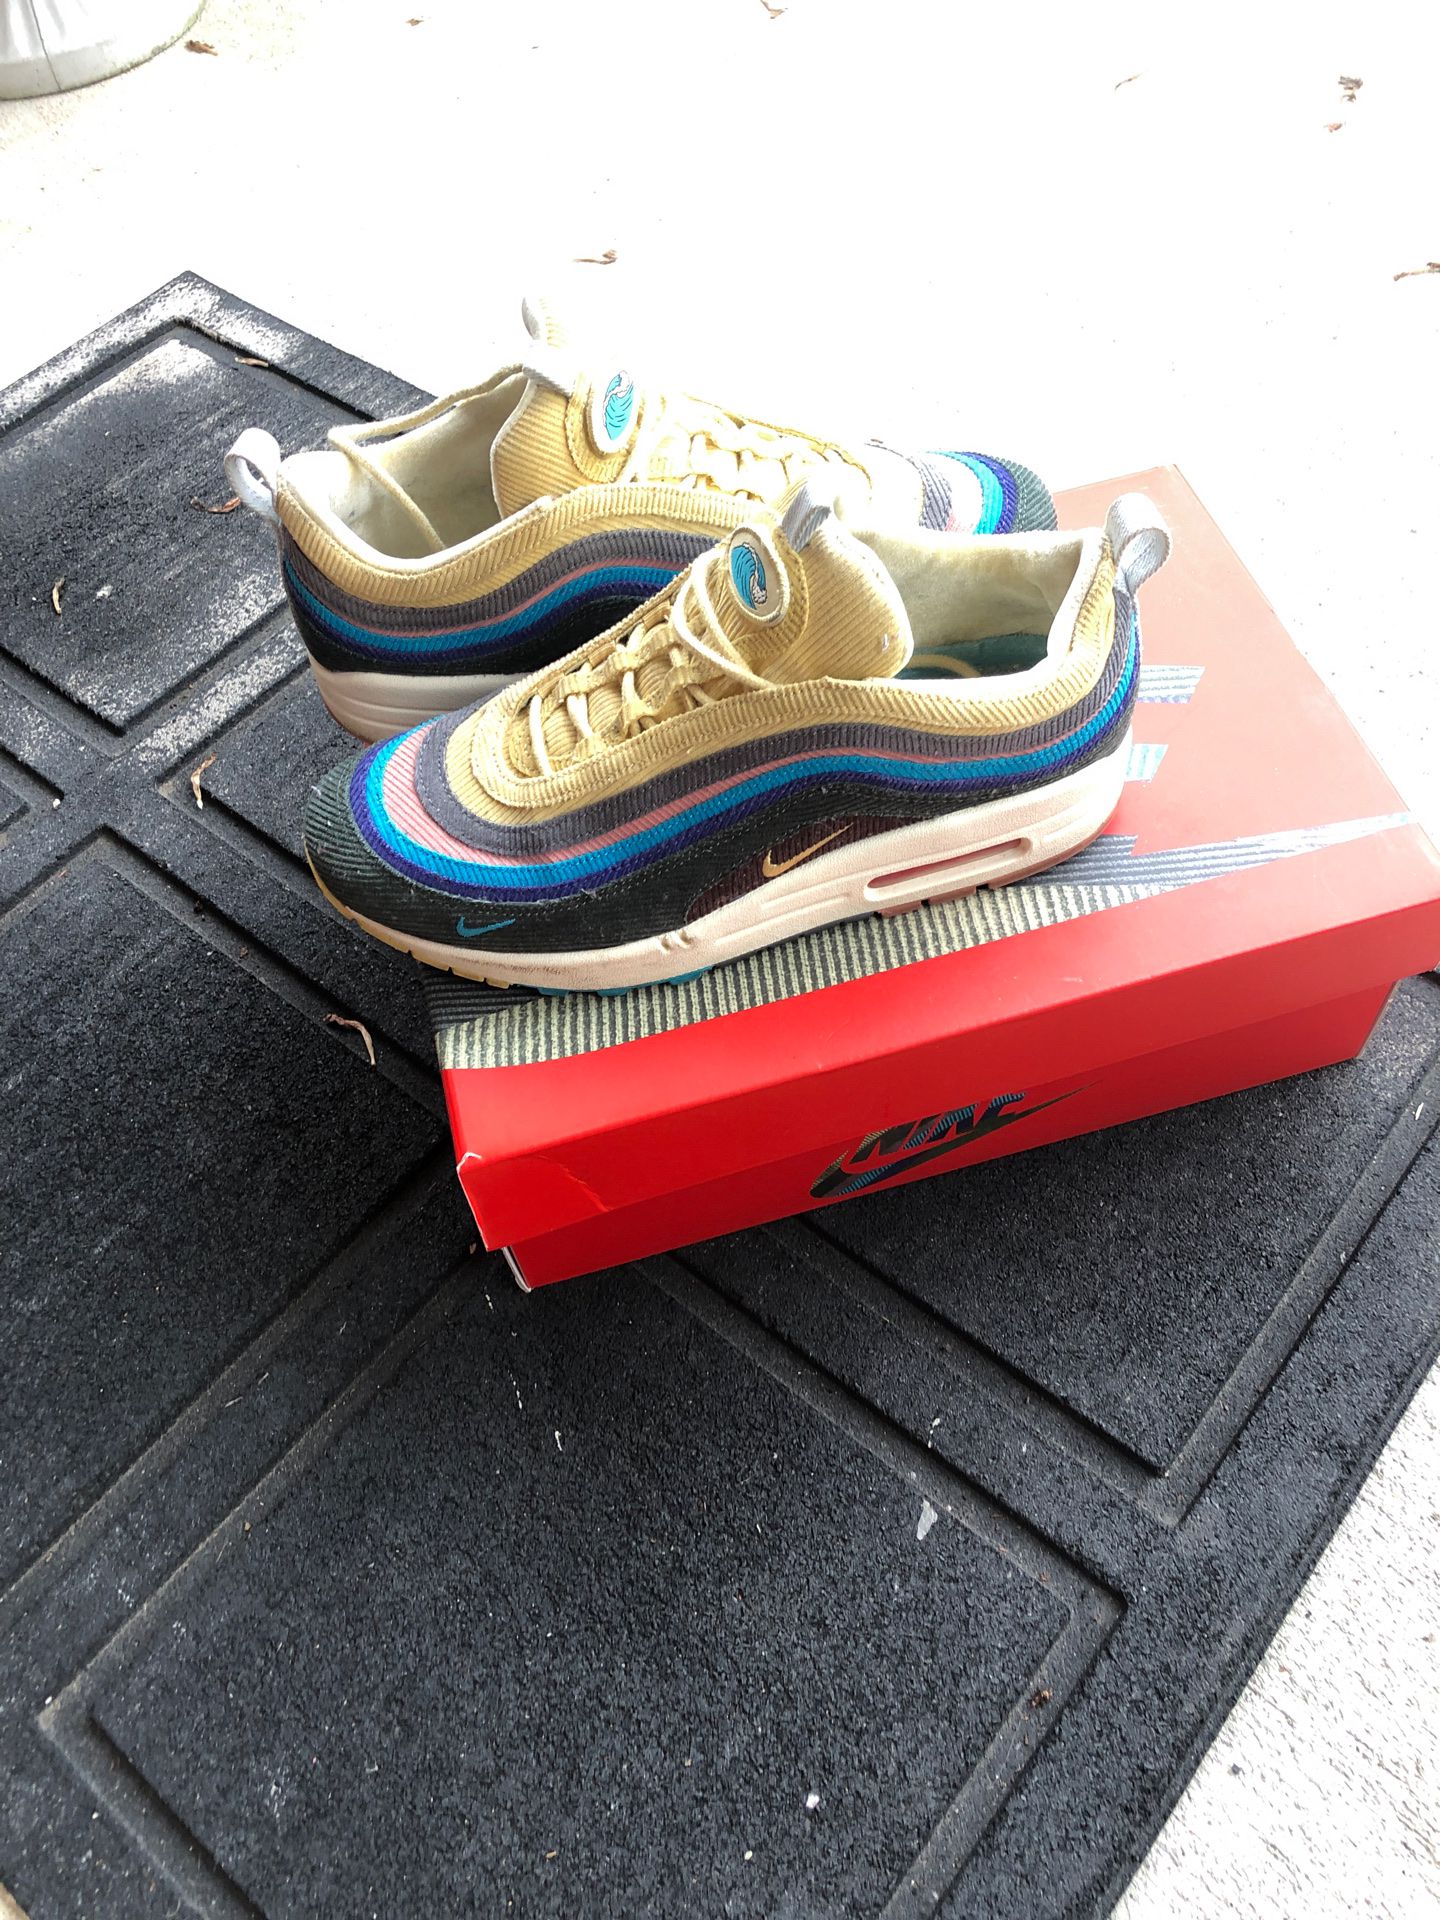 Air max Sean wotherspoon size 8